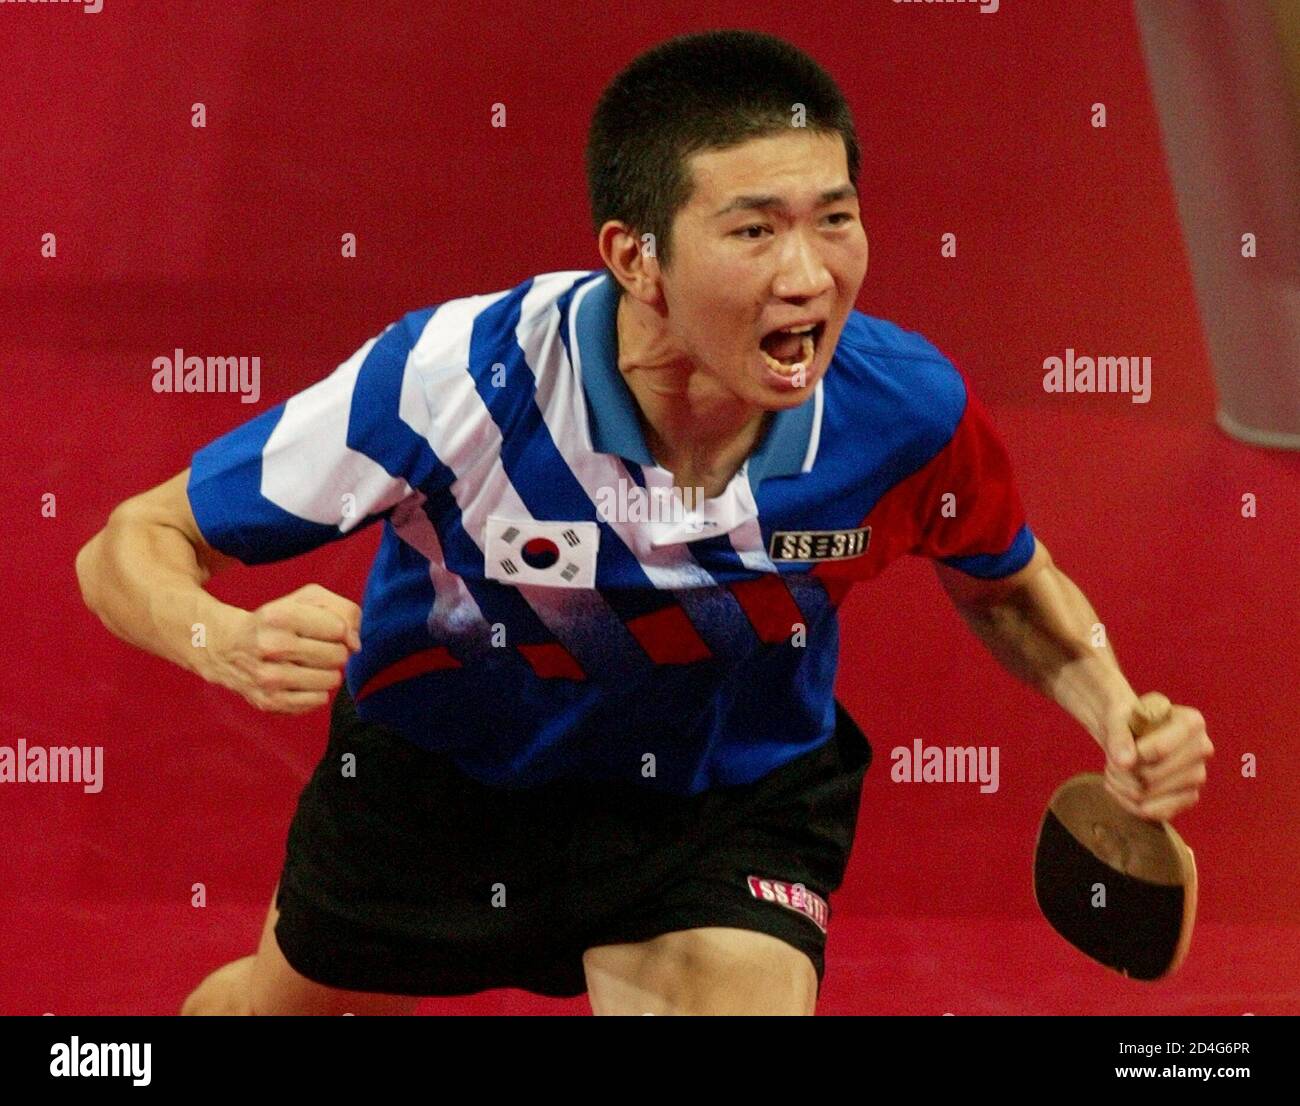 South Korea's gold medallist  Ryu Seung Min celebrates victory over [China's Wang Hao] at men's singles final Table tennis match at Athens 2004 Olympic Summer Games, August 23, 2004. [Ryu won the gold with a score of 4-2.] Stock Photo